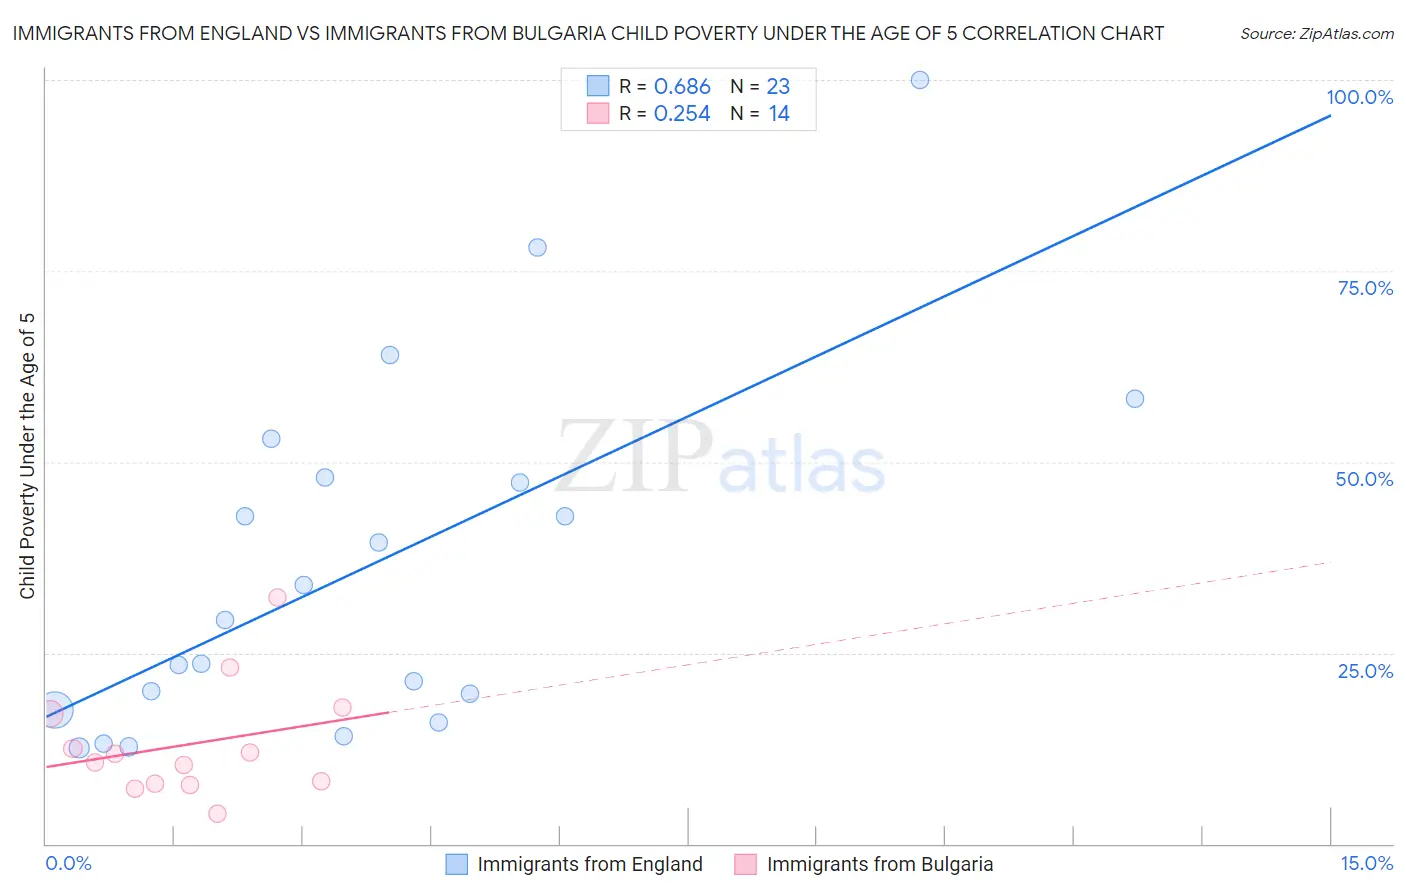 Immigrants from England vs Immigrants from Bulgaria Child Poverty Under the Age of 5